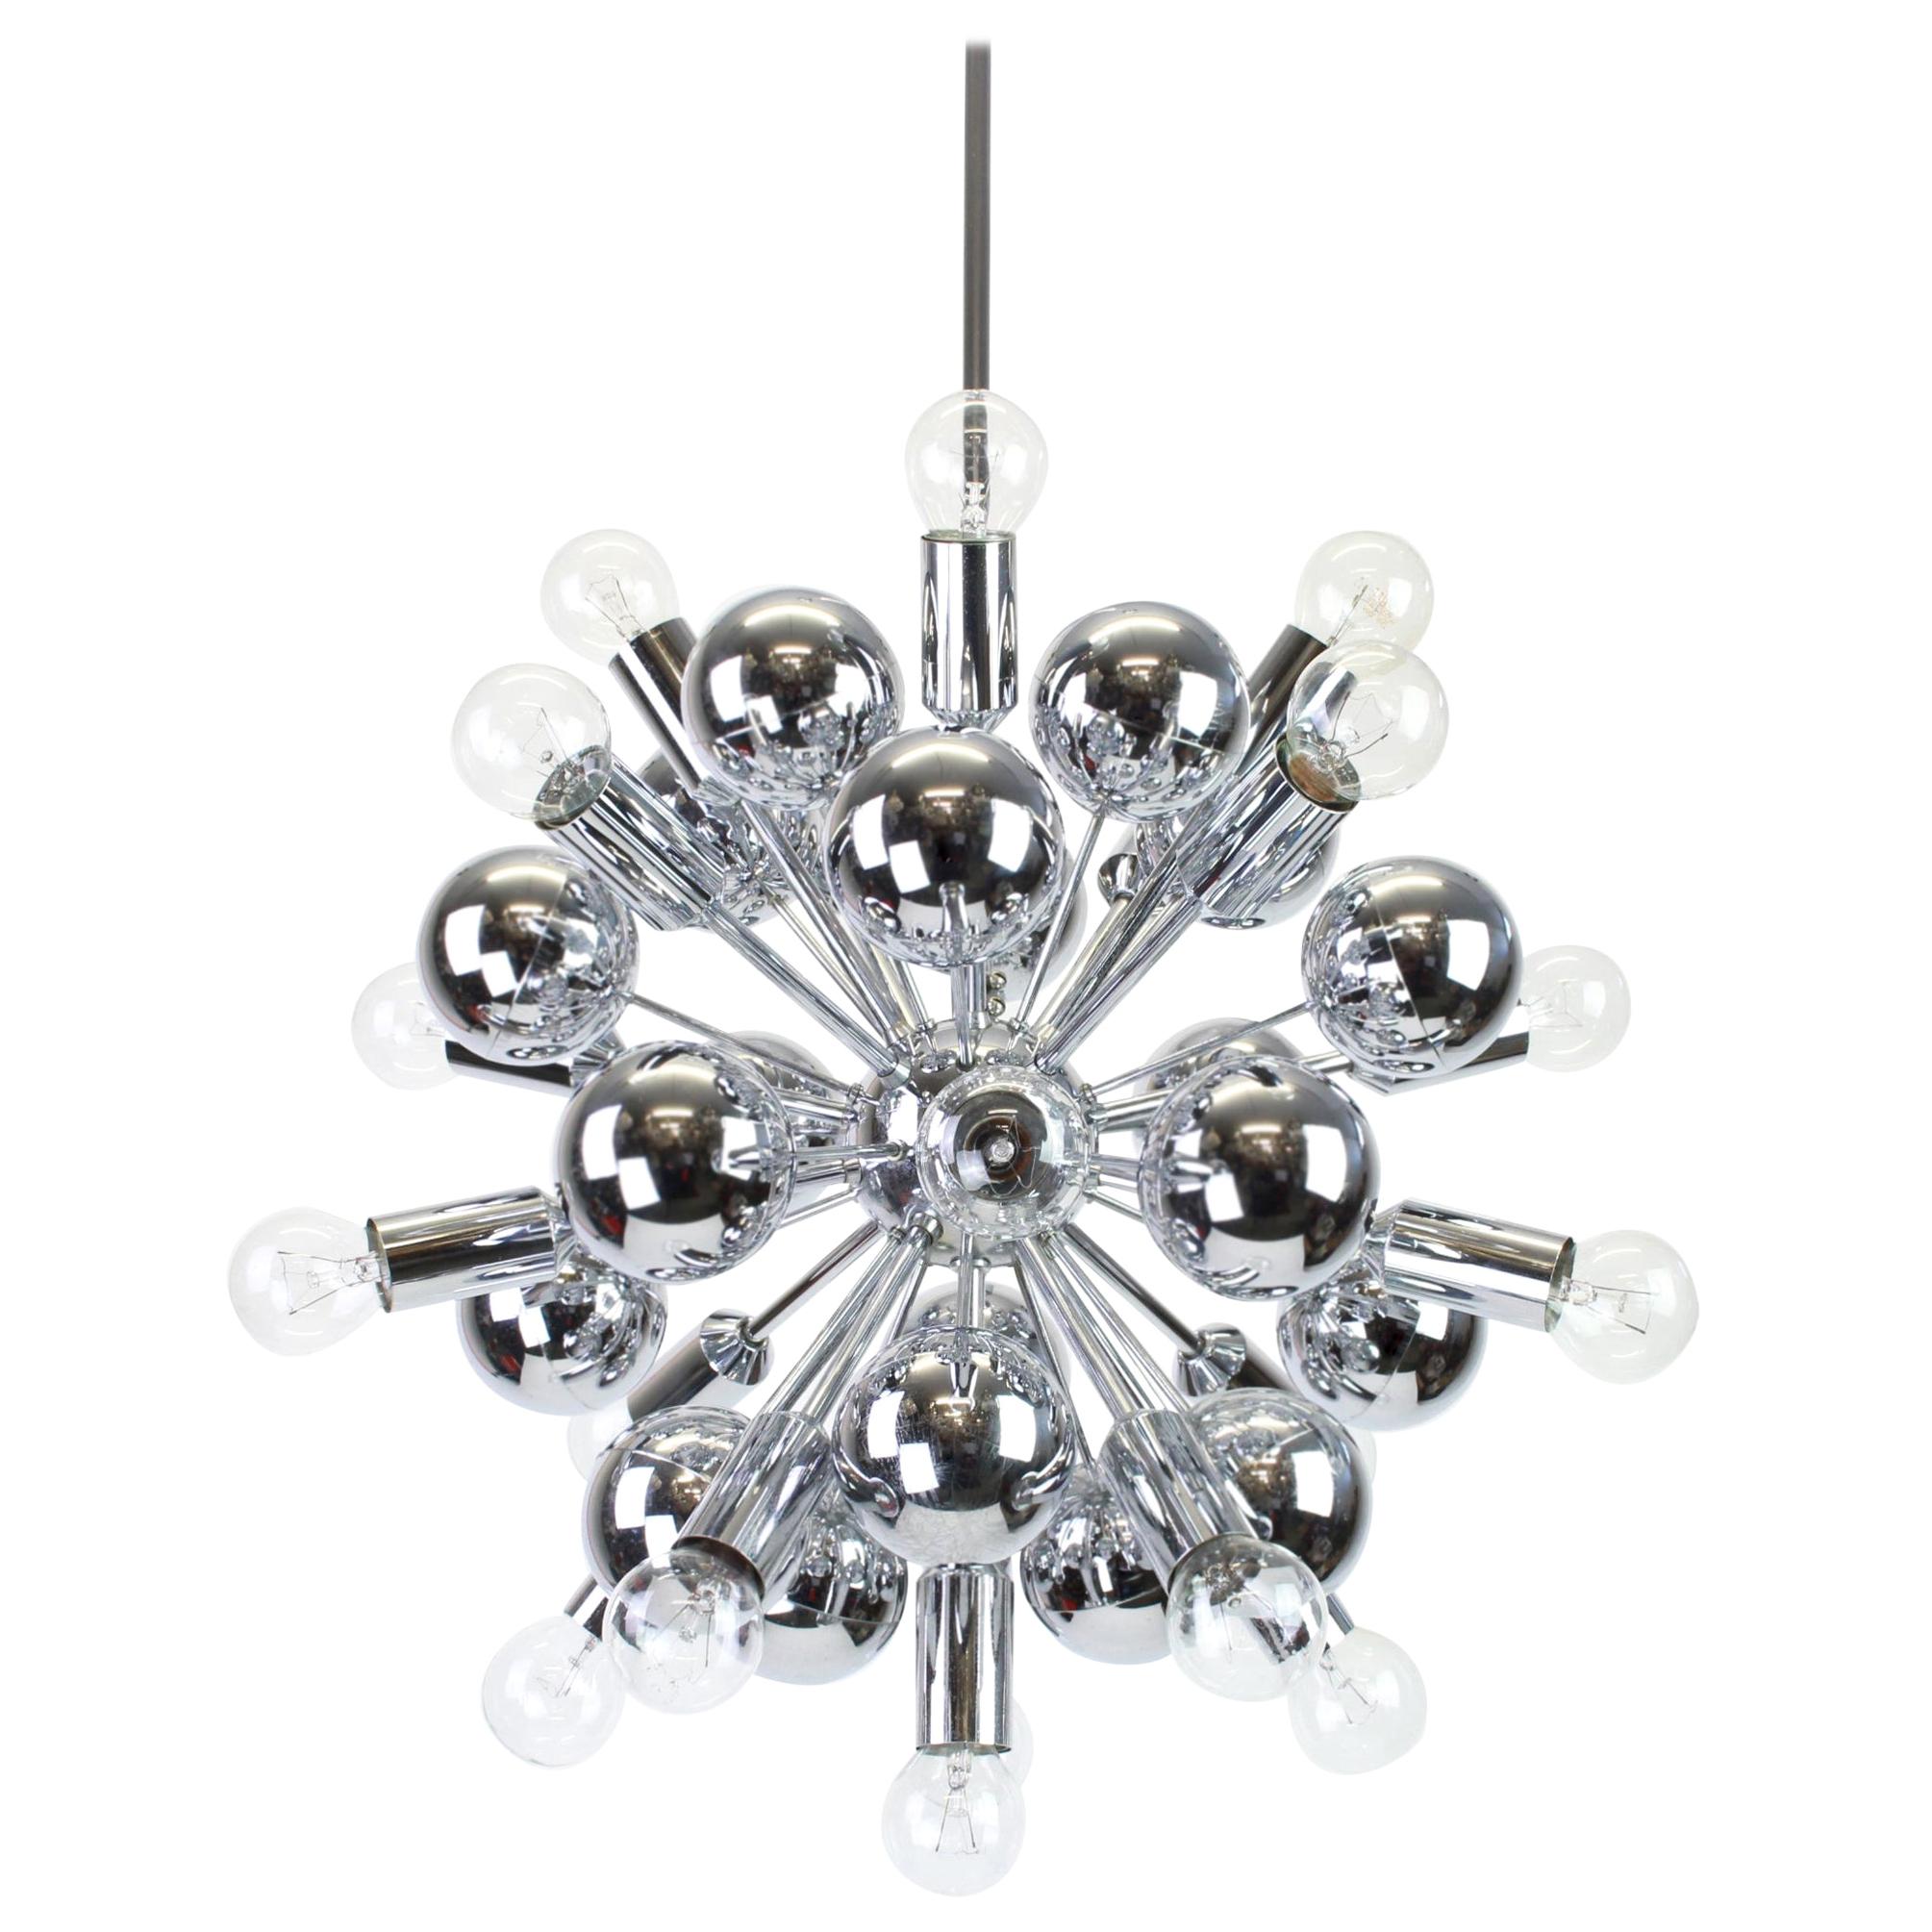 Large Chrome Space Age Sputnik Chandelier by Cosack, Germany, 1970s